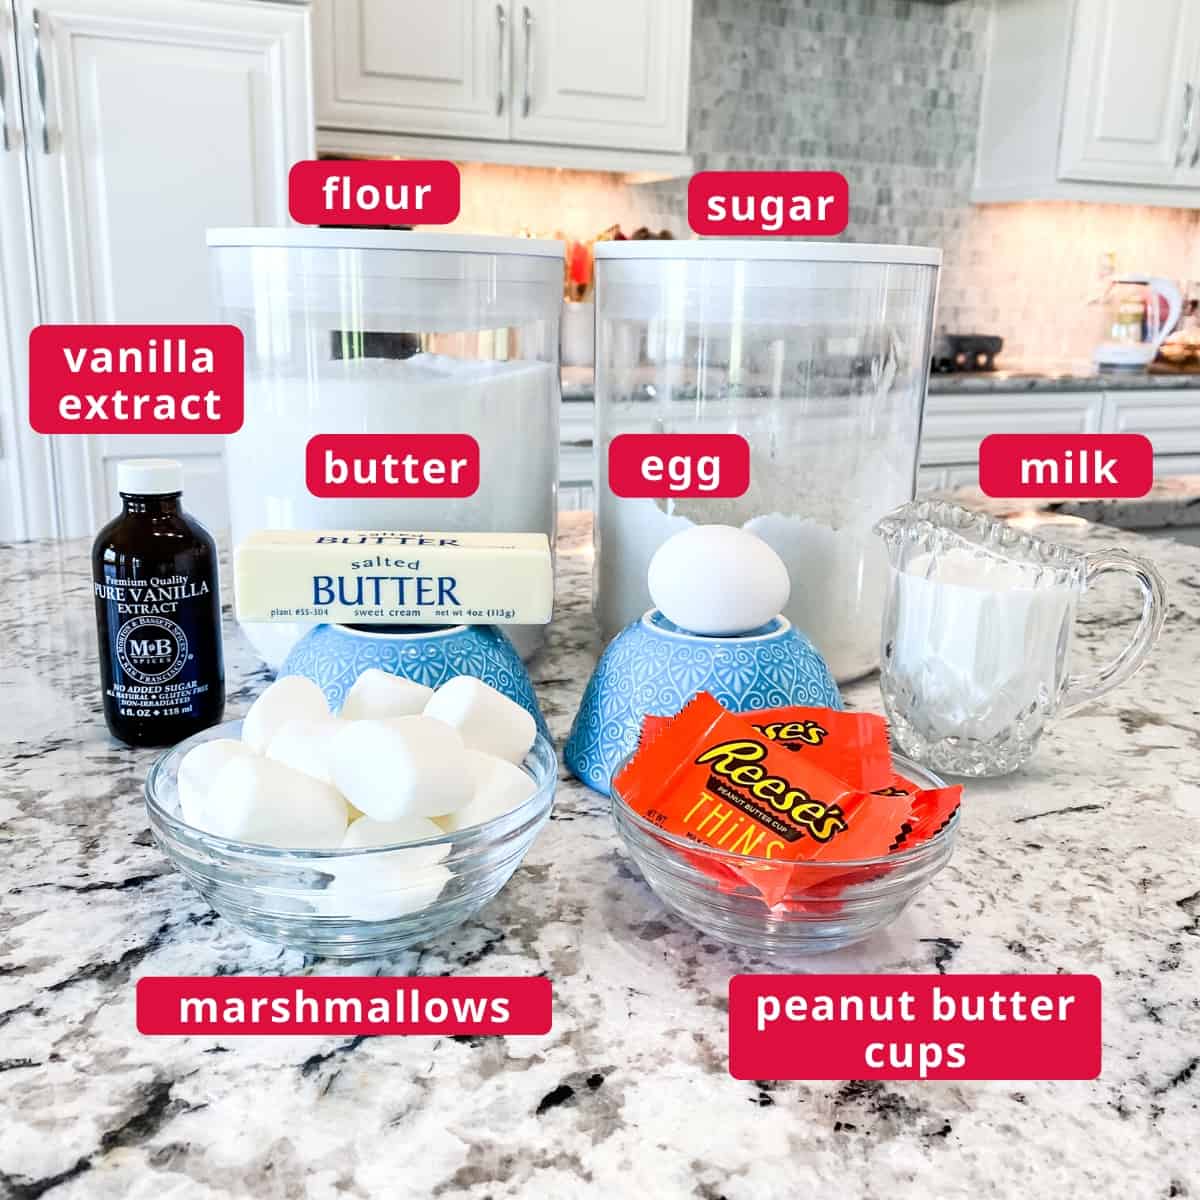 Ingredients for recipe are pictured and labeled. Clockwise from top right: sugar, egg, milk, peanut butter cups, marshmallows, butter, vanilla extract, and flour.